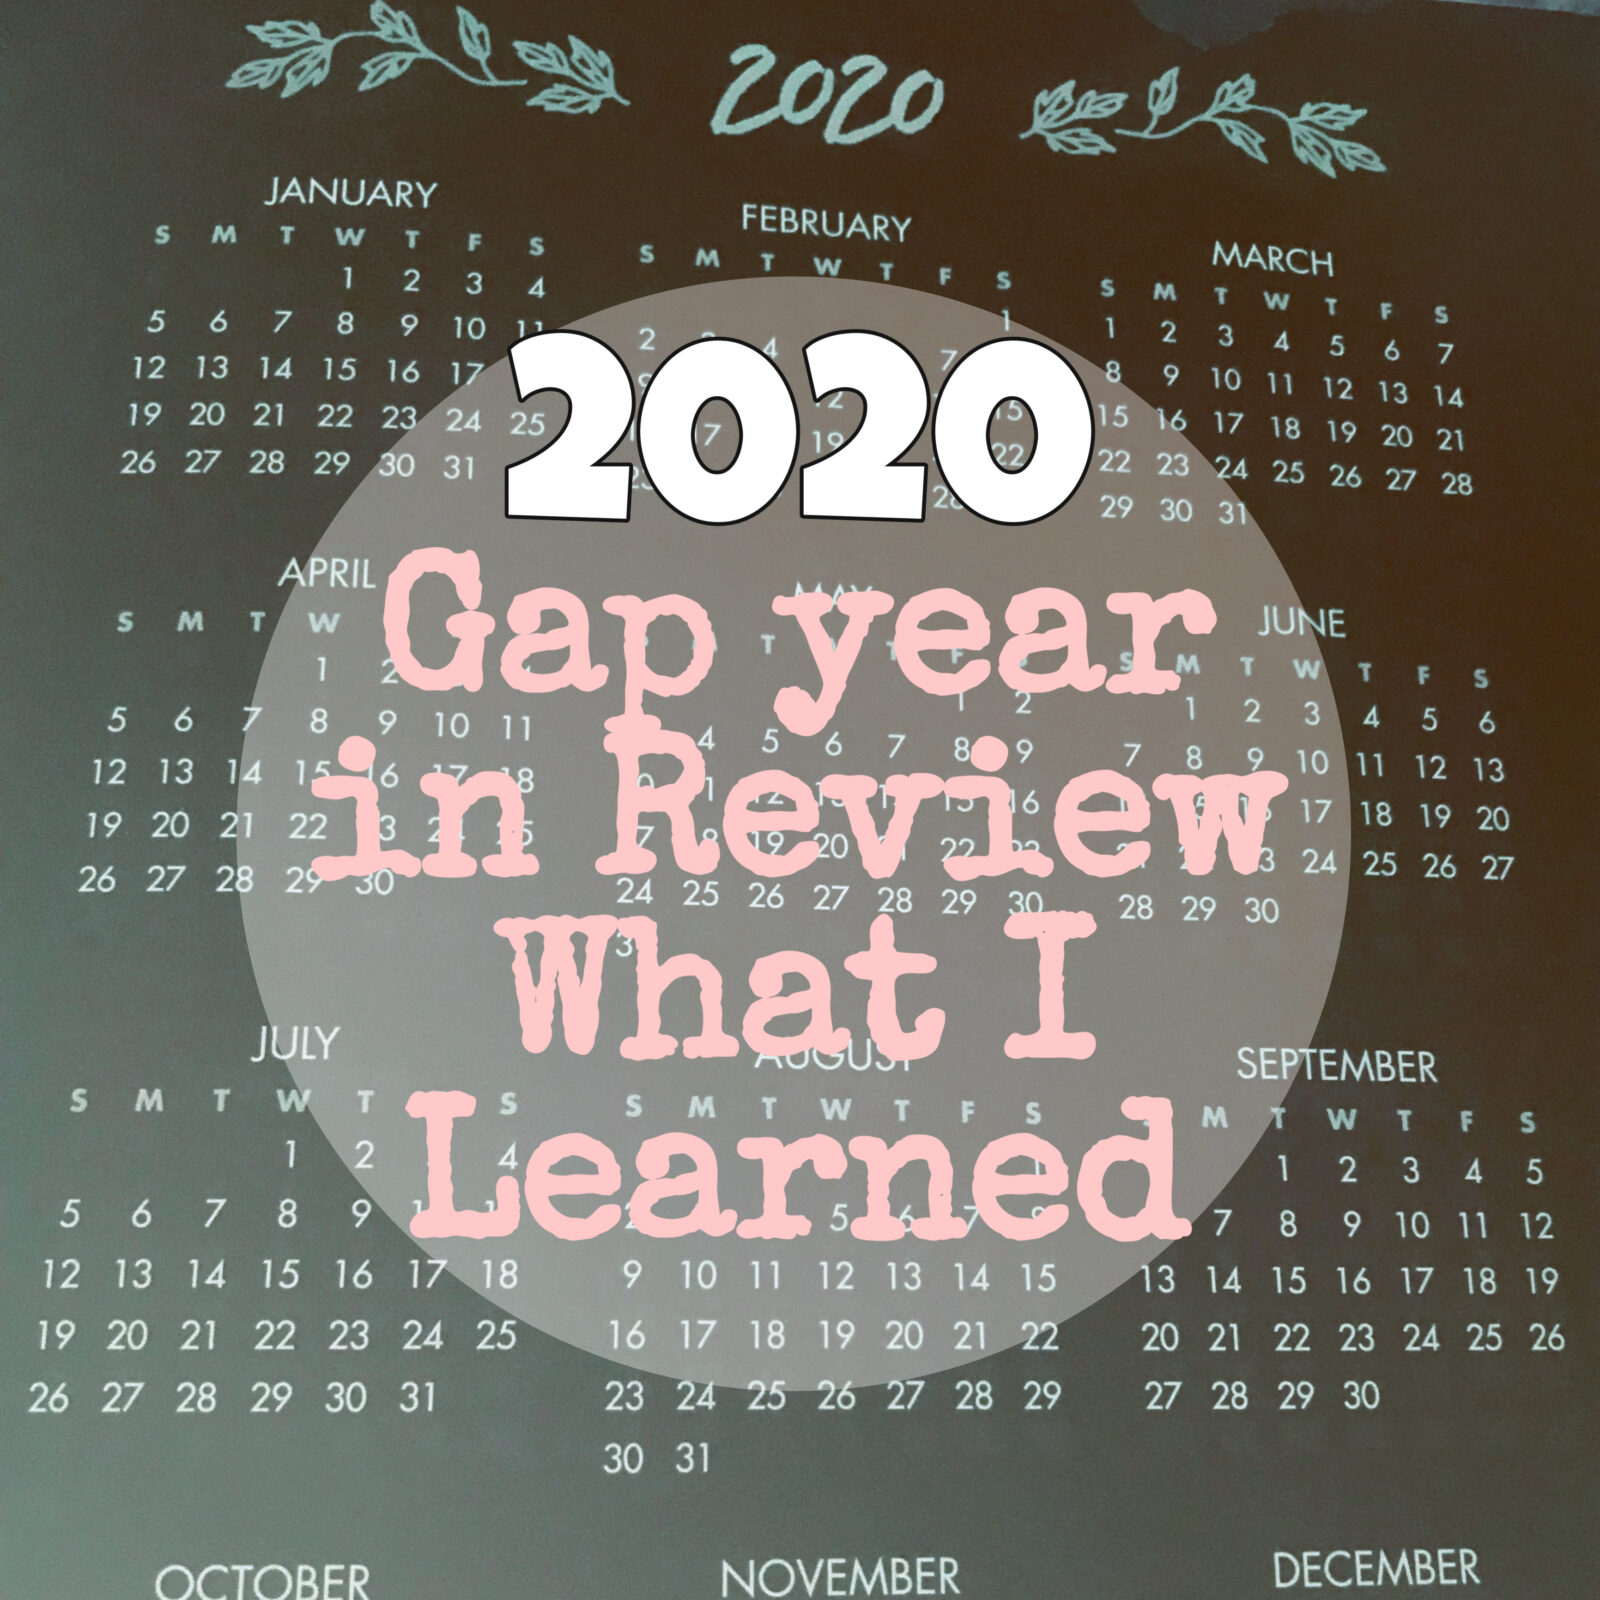 Our Gap Year in Review / What I Learned in 2020